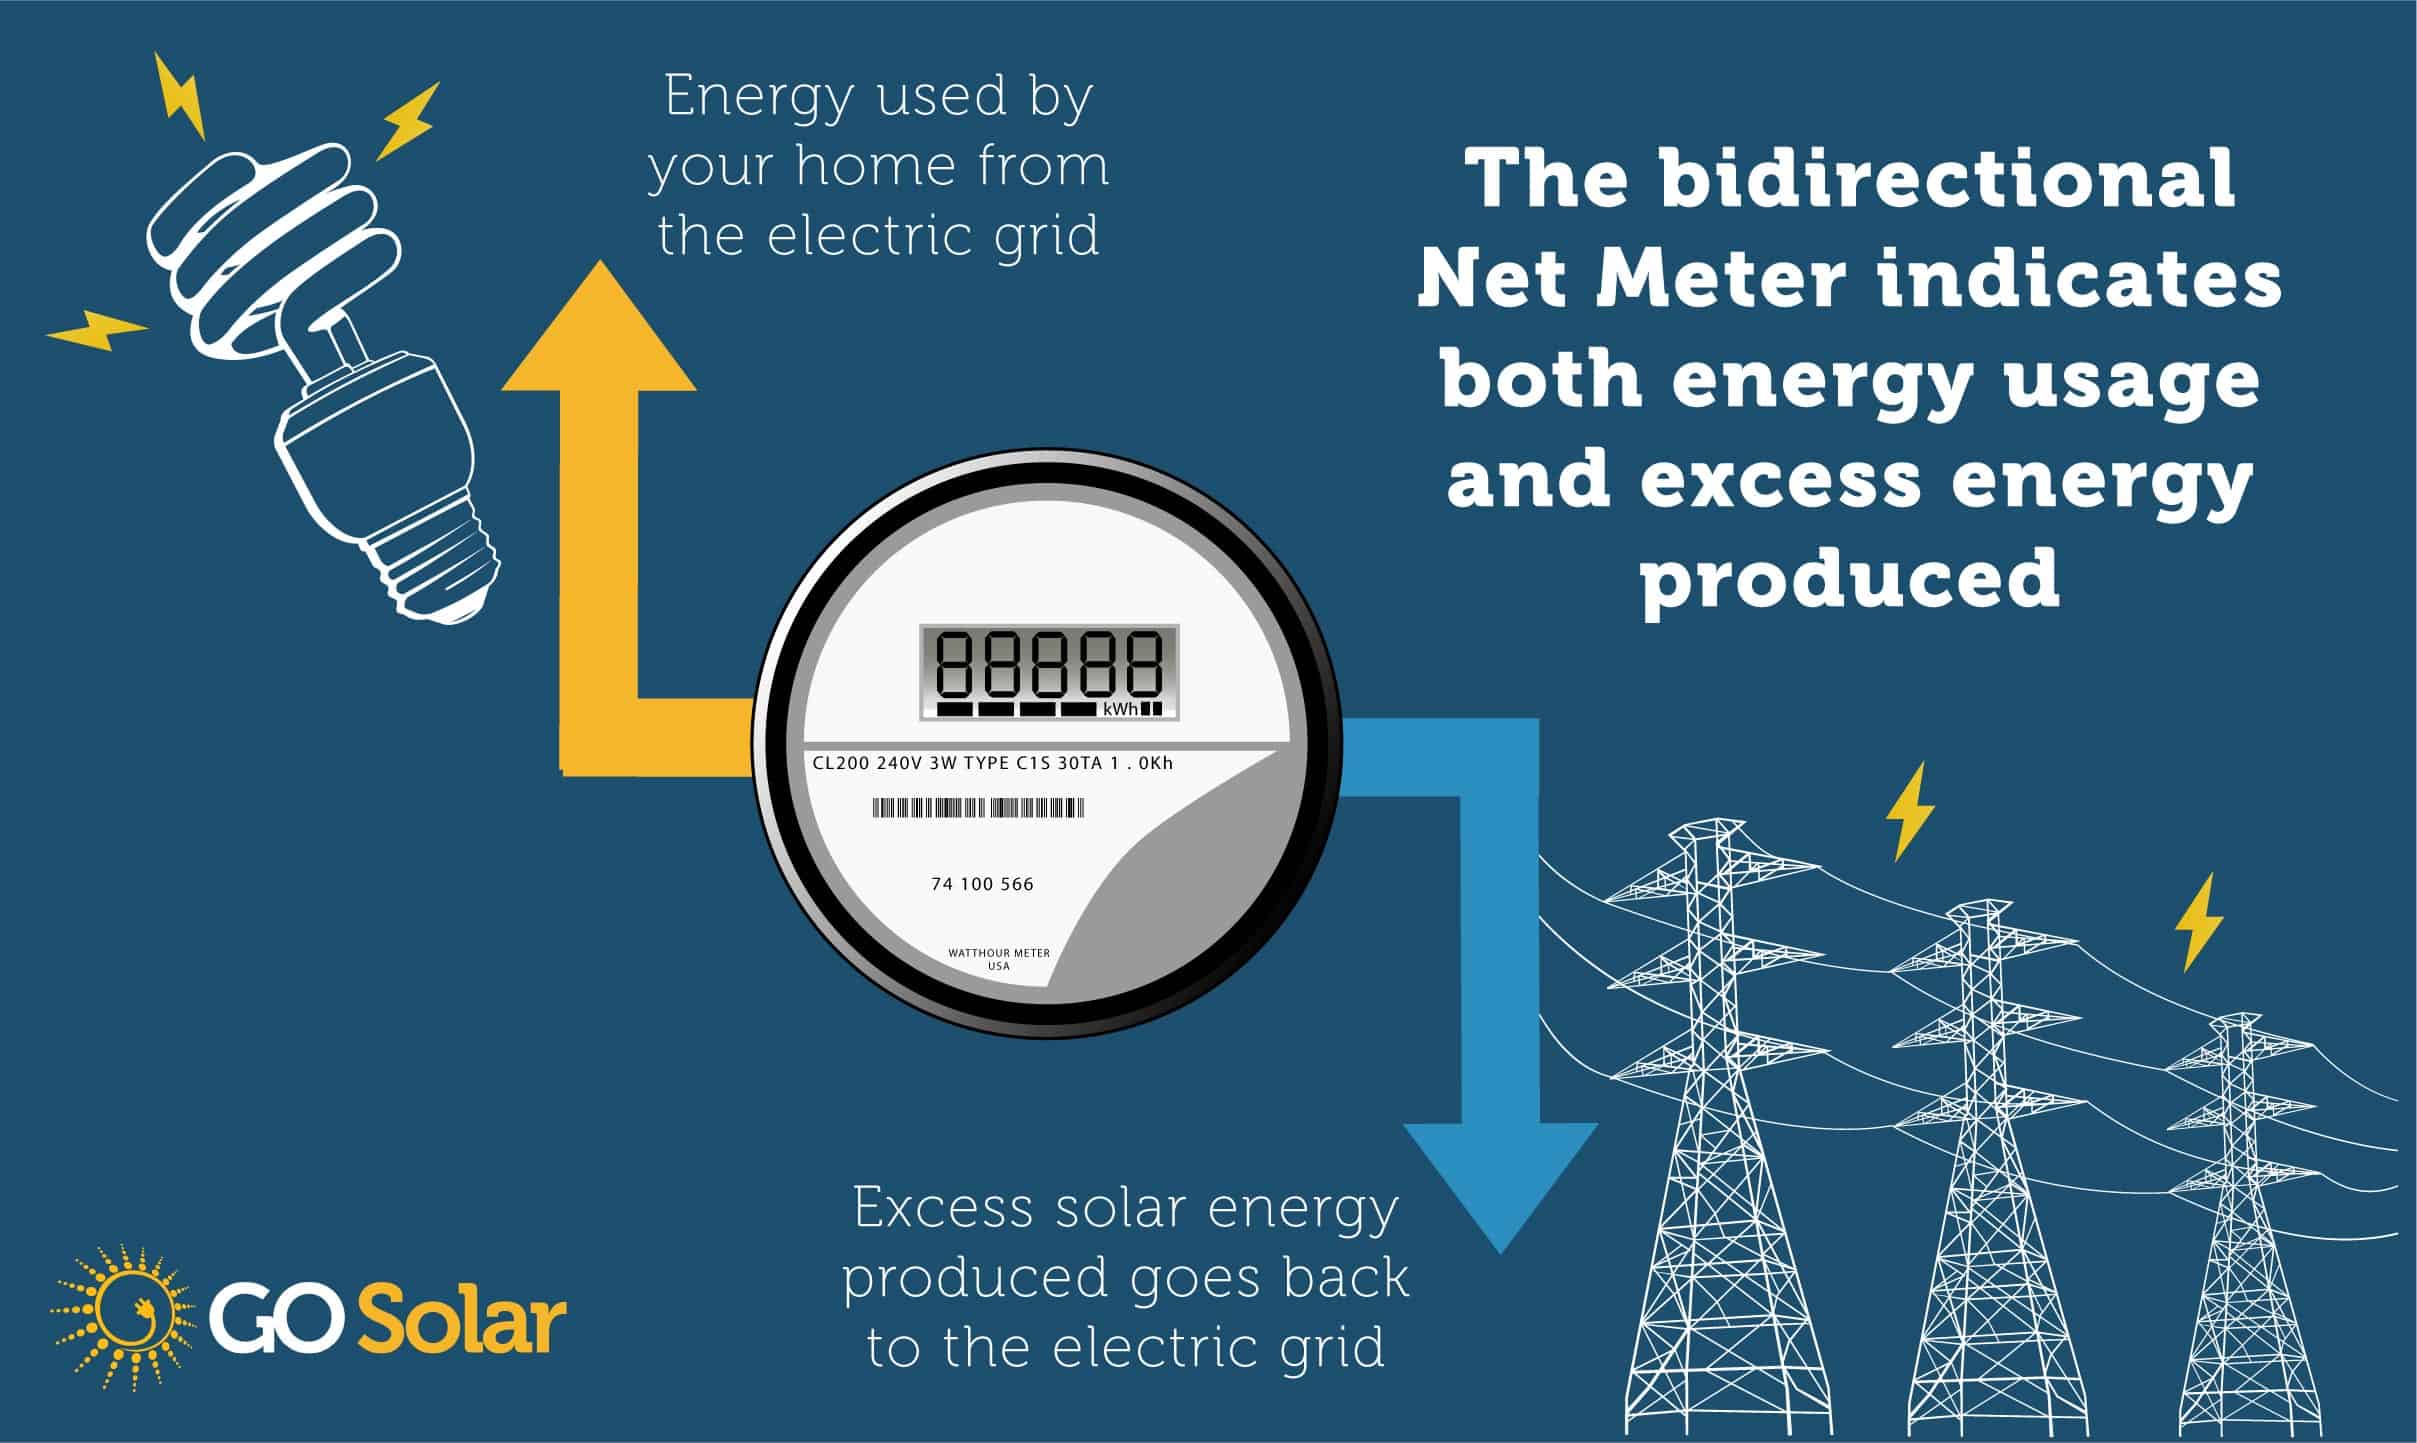 How a Net Meter works